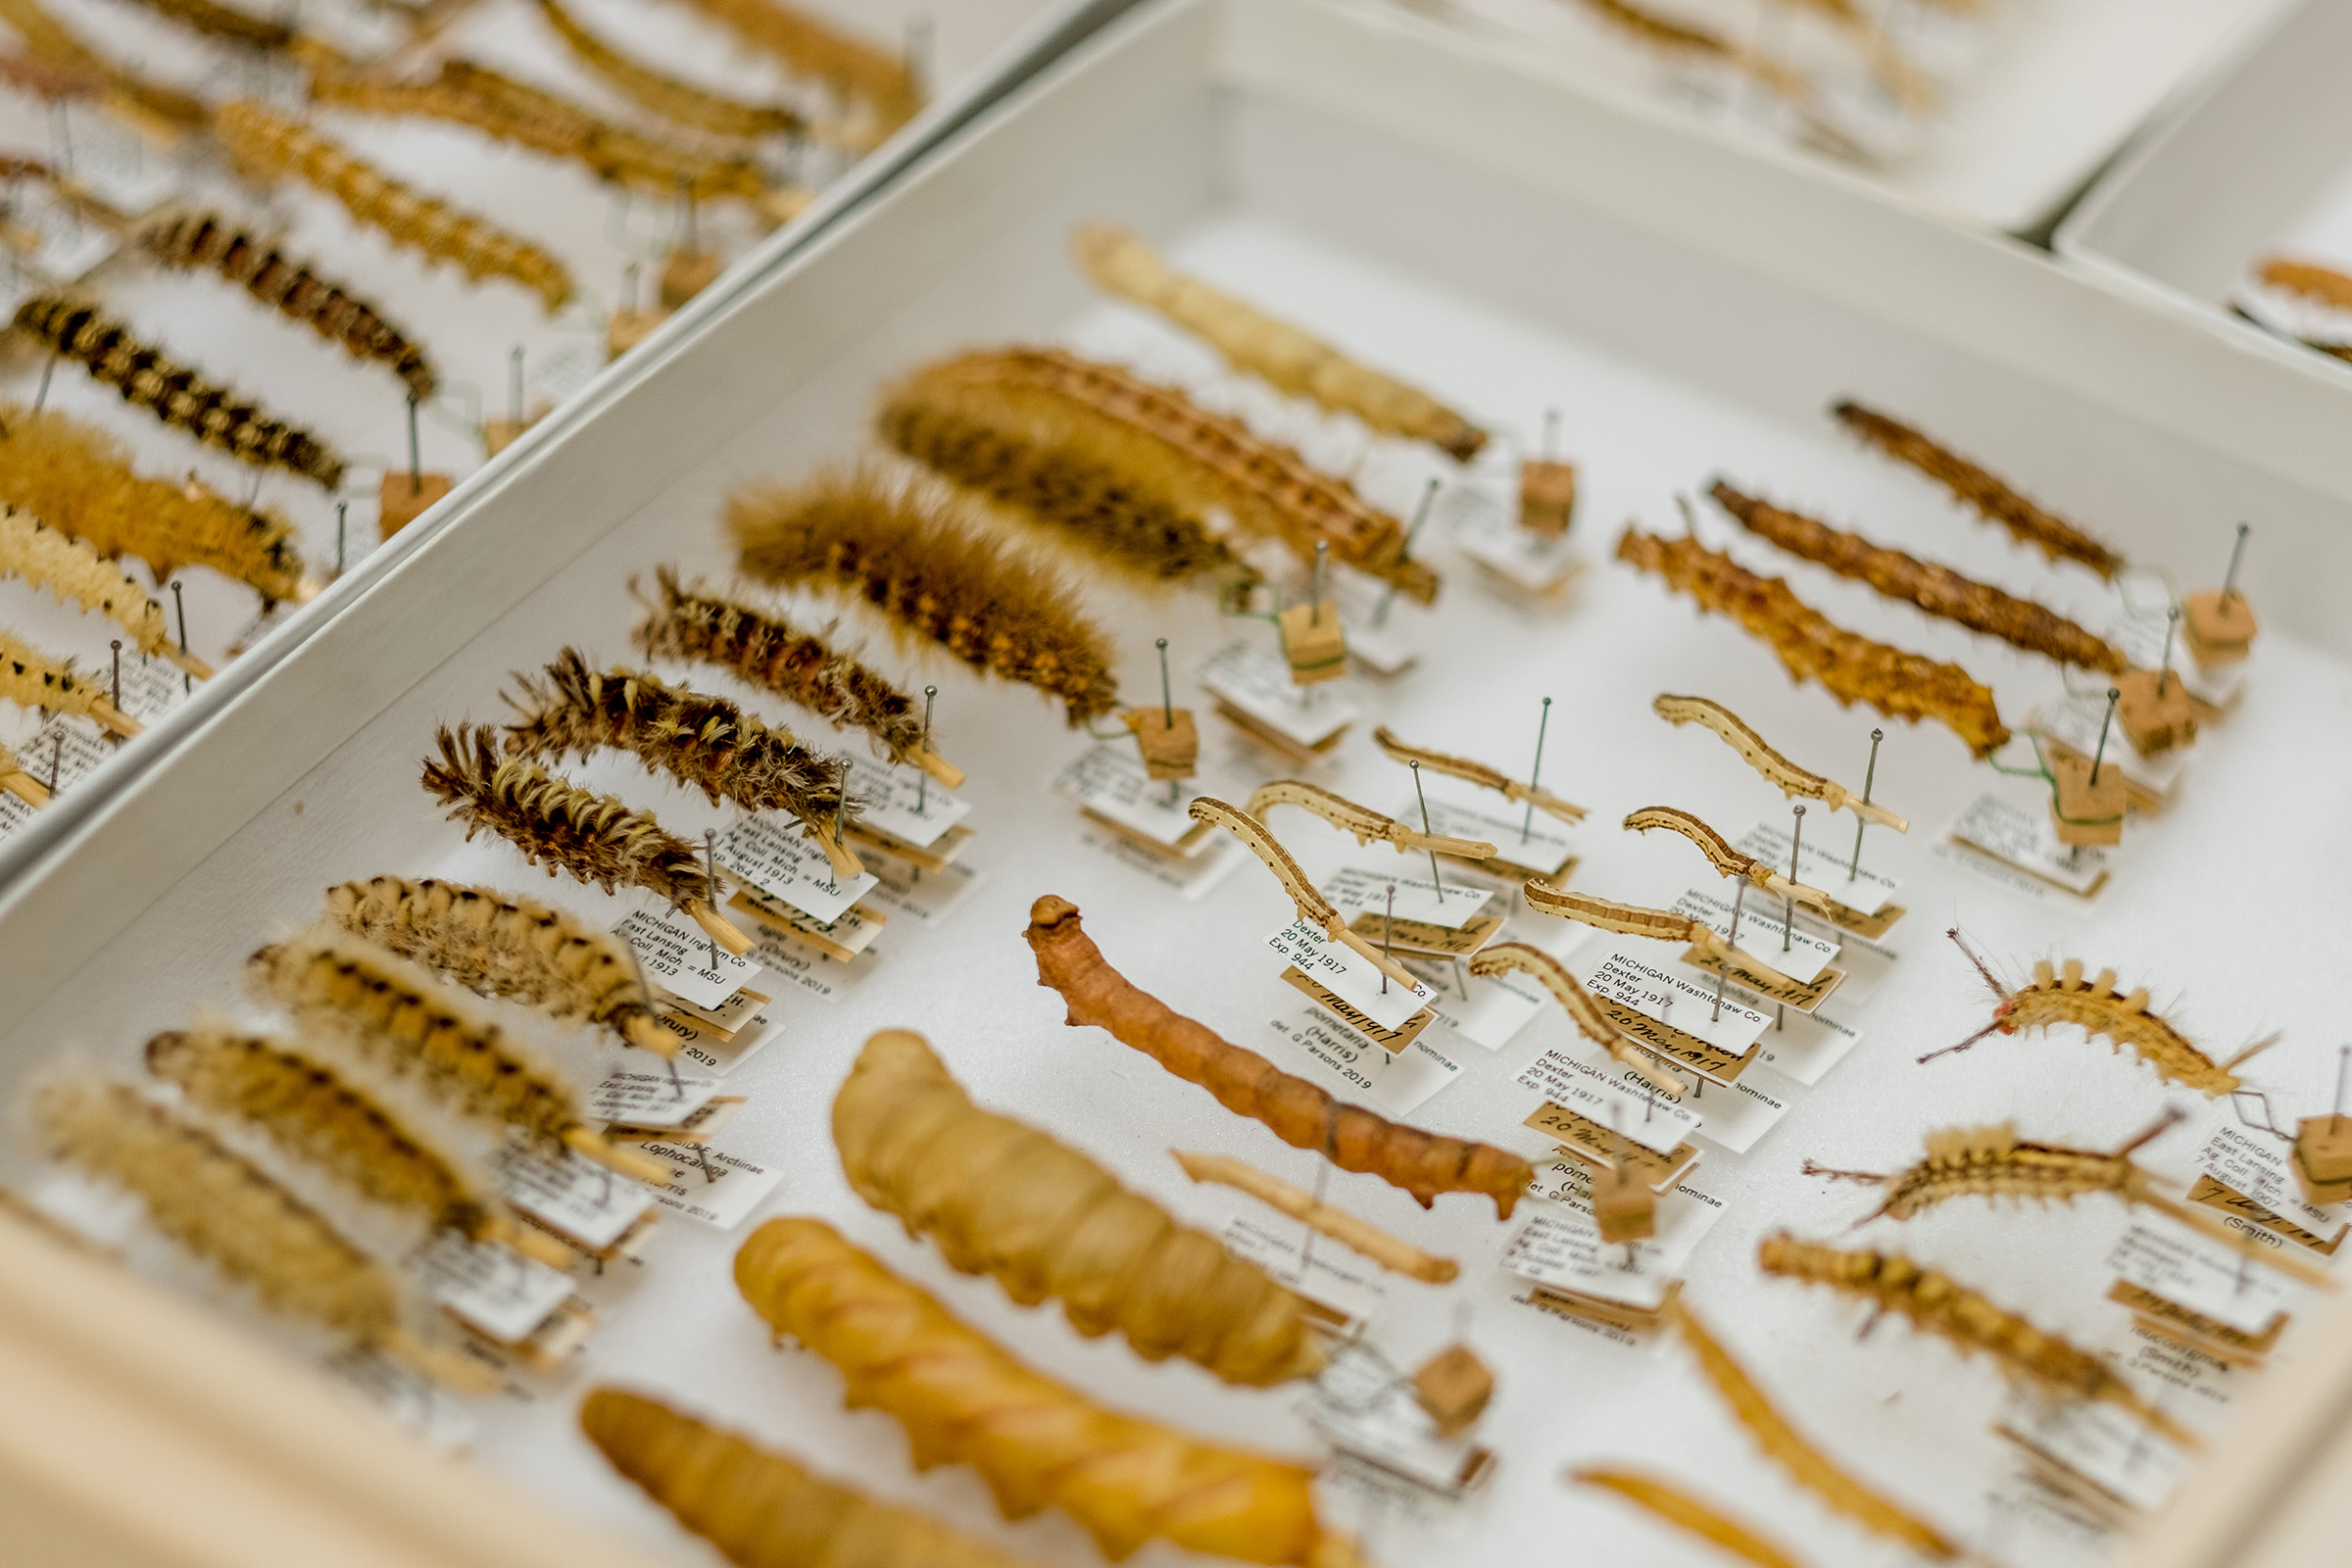 Early specimens collected by AJ Cook